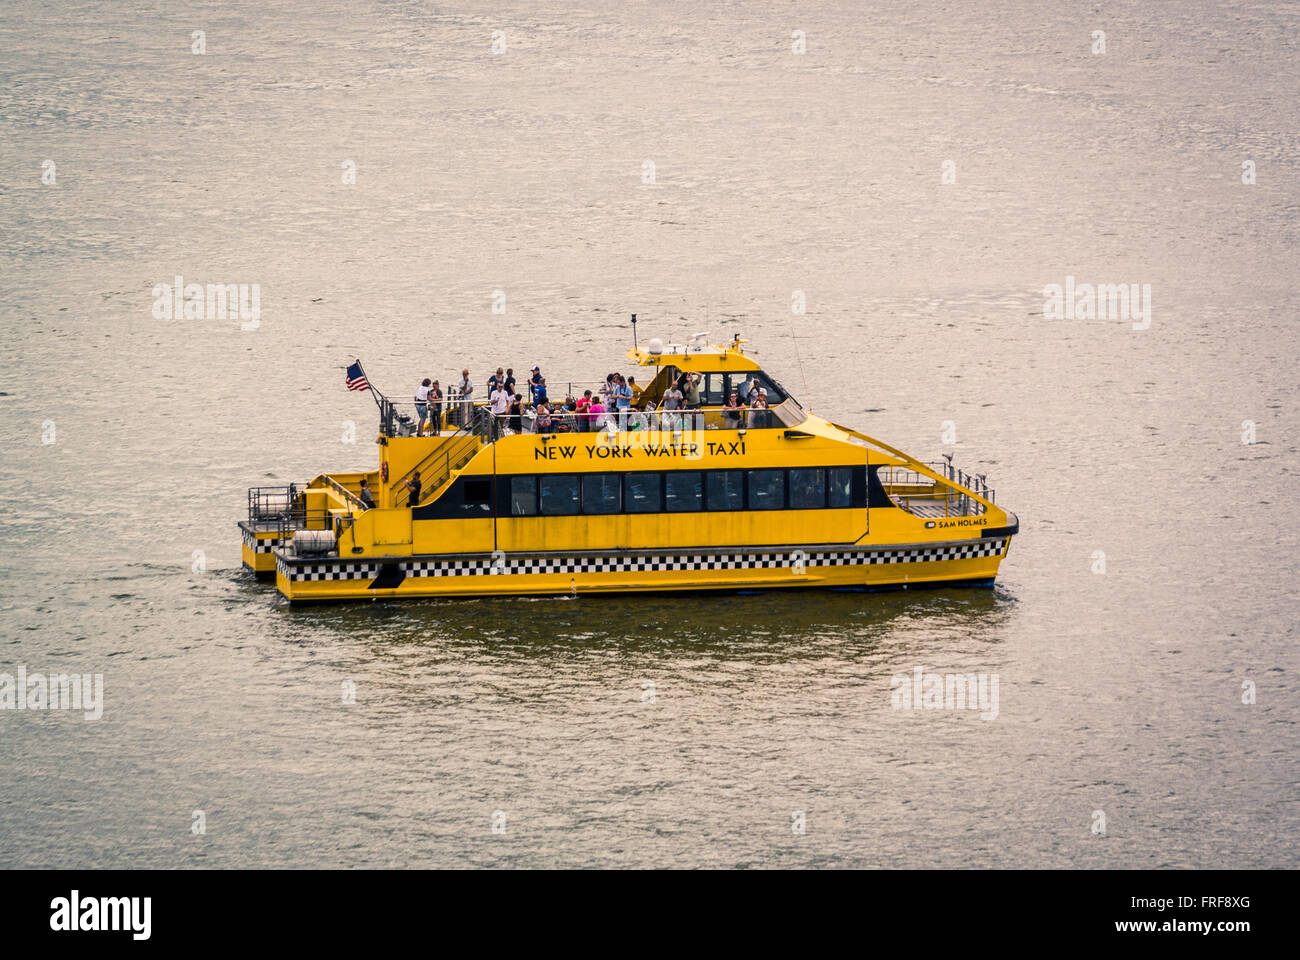 New York Water Taxi, New York, USA Stock Photo